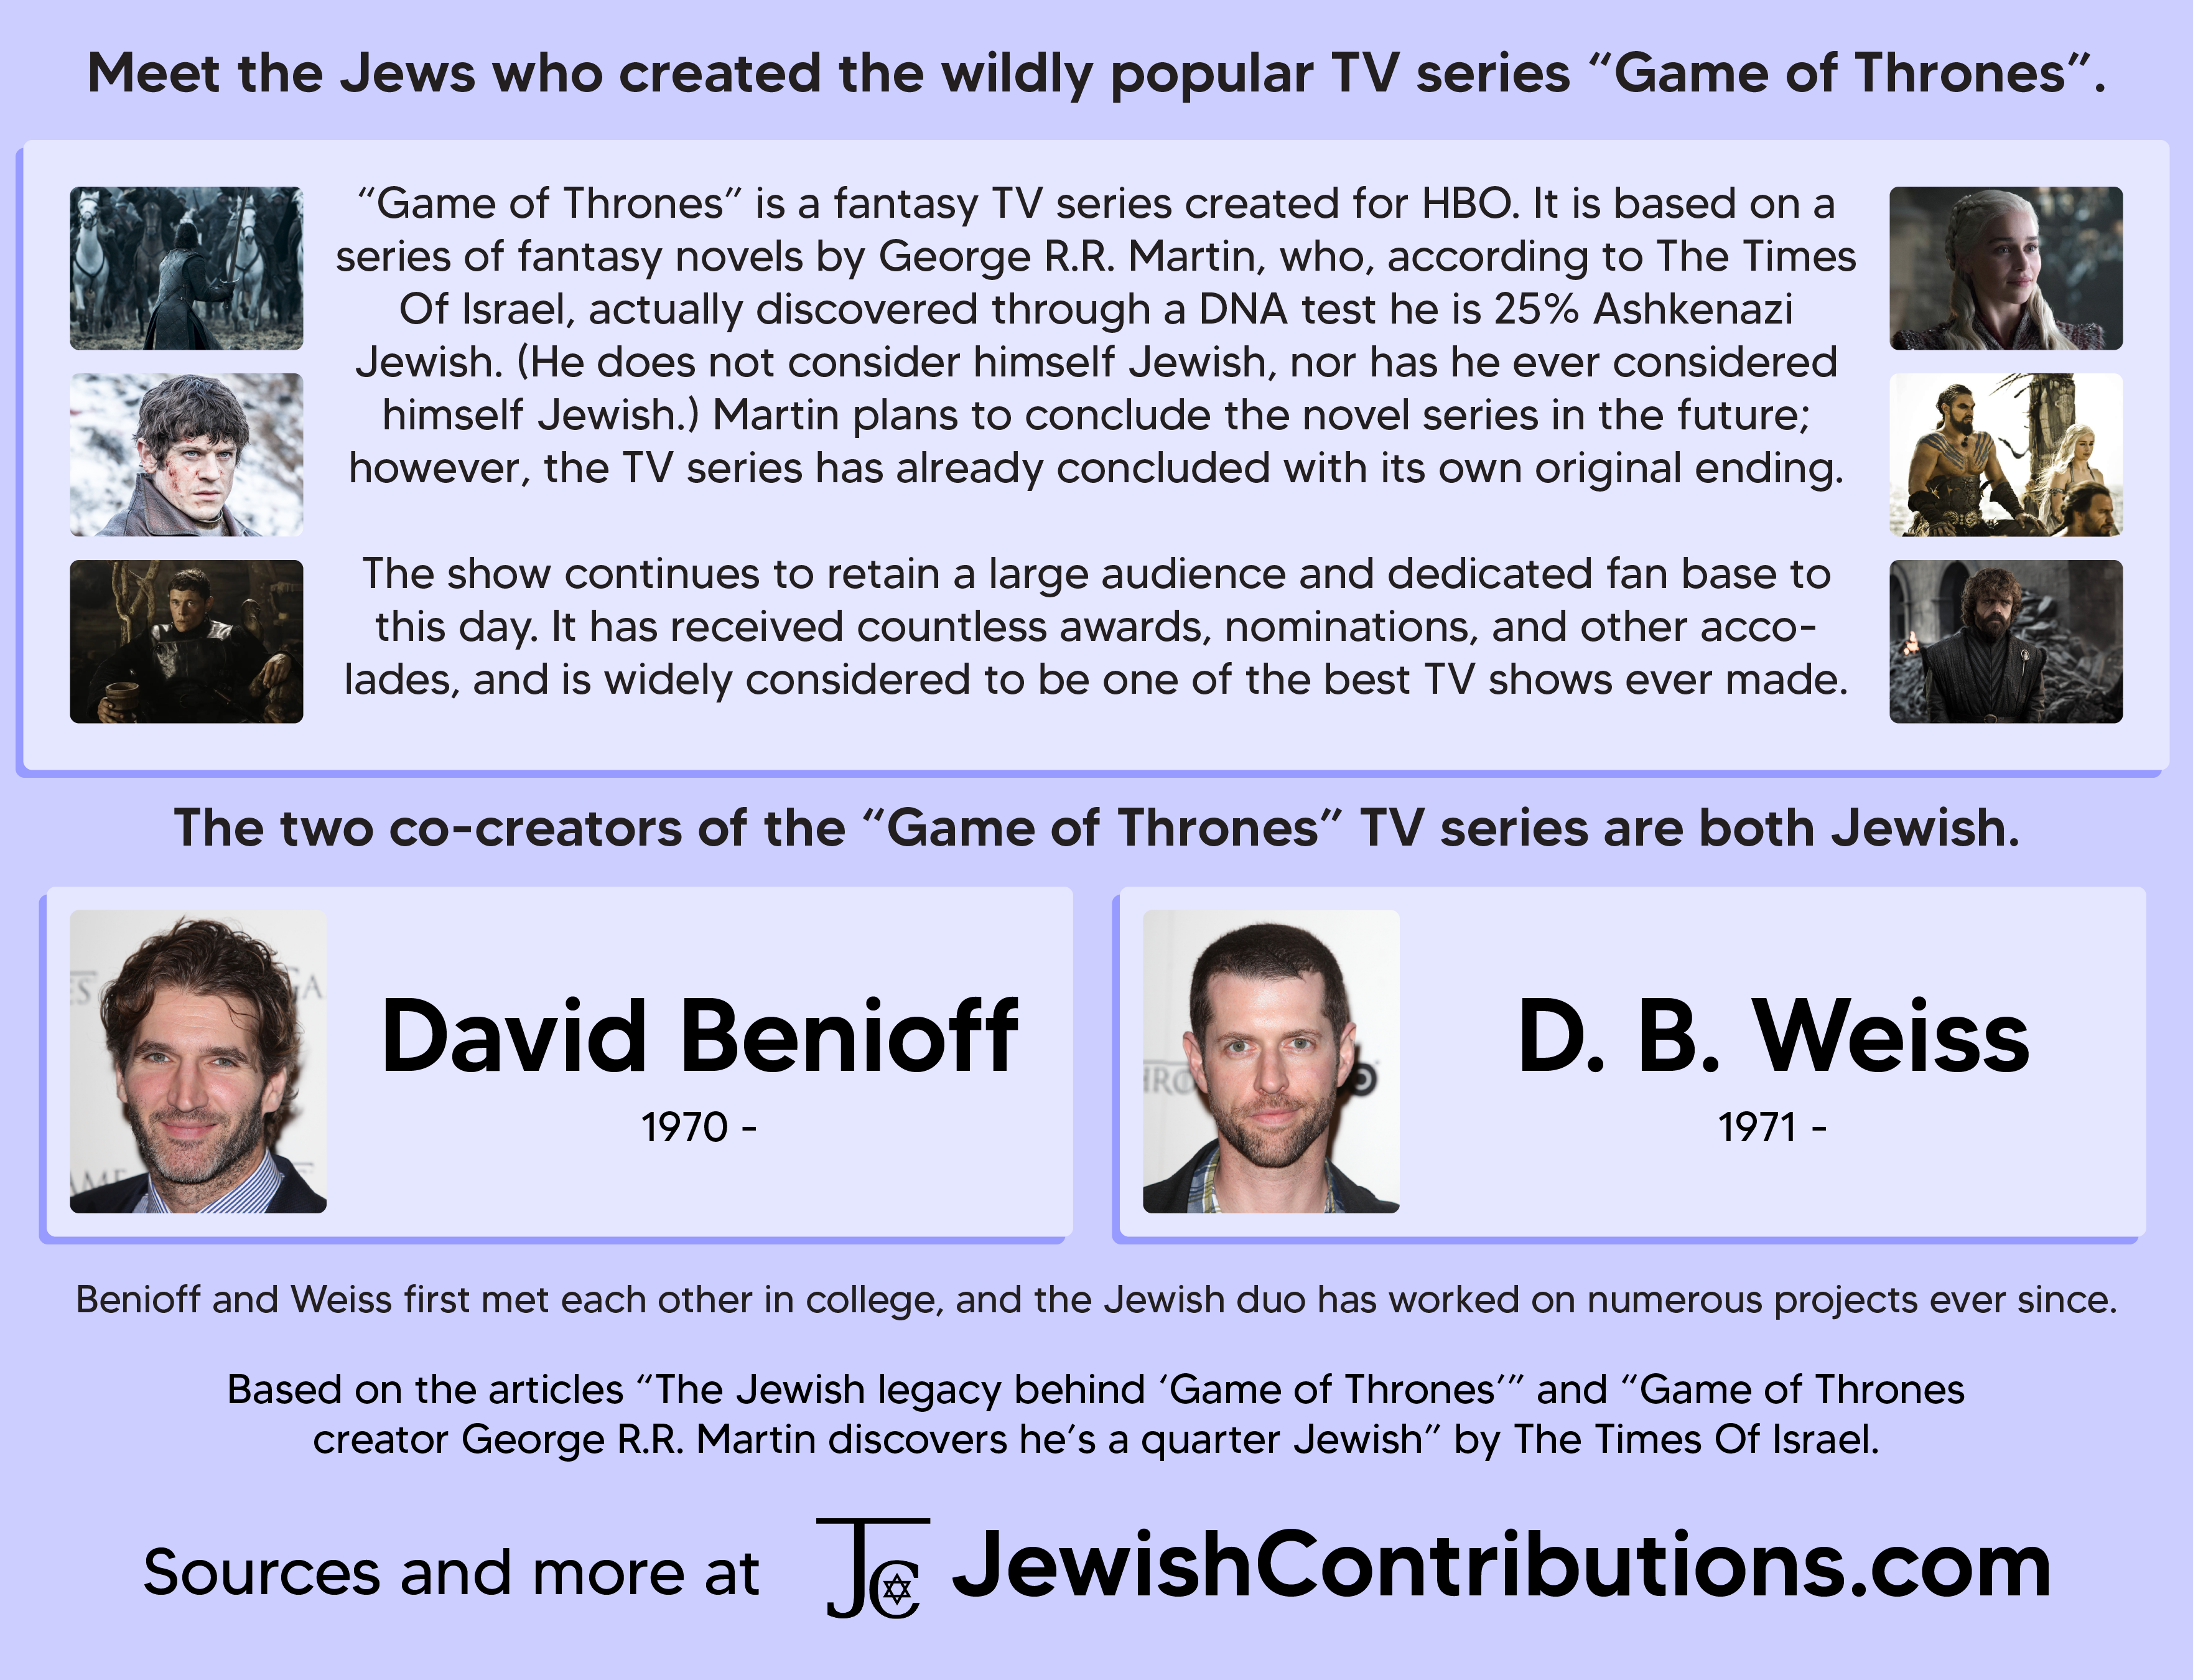 Meet the Jews who created the wildly popular TV series “Game of Thrones”.